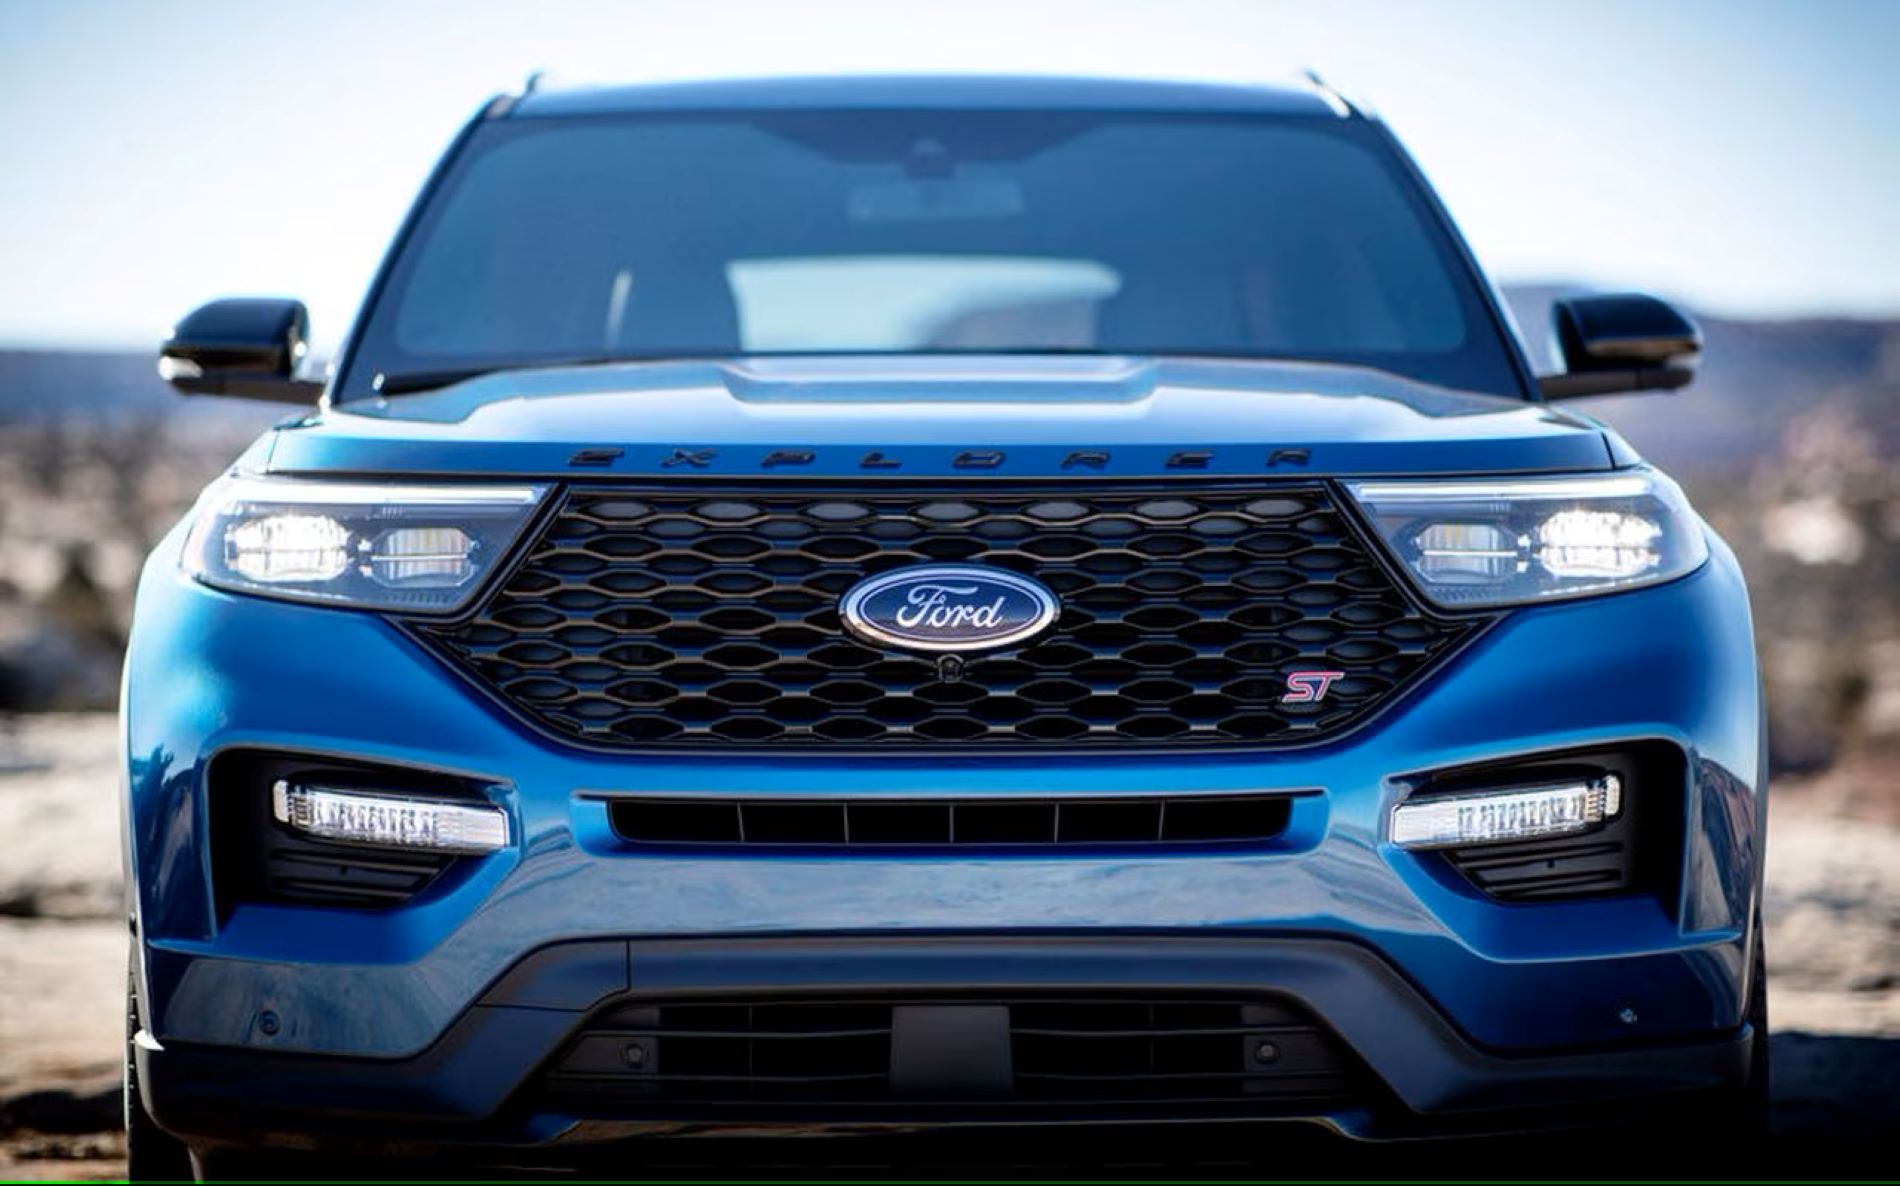 The Ford Explorer ST features system rear view camera, A roof rack, automatic high Beams, ten speed automatic transmission, intelligent adaptive cruise control, automatic emergency braking, keyless ignition system, are all available on the Ford Explorer ST.